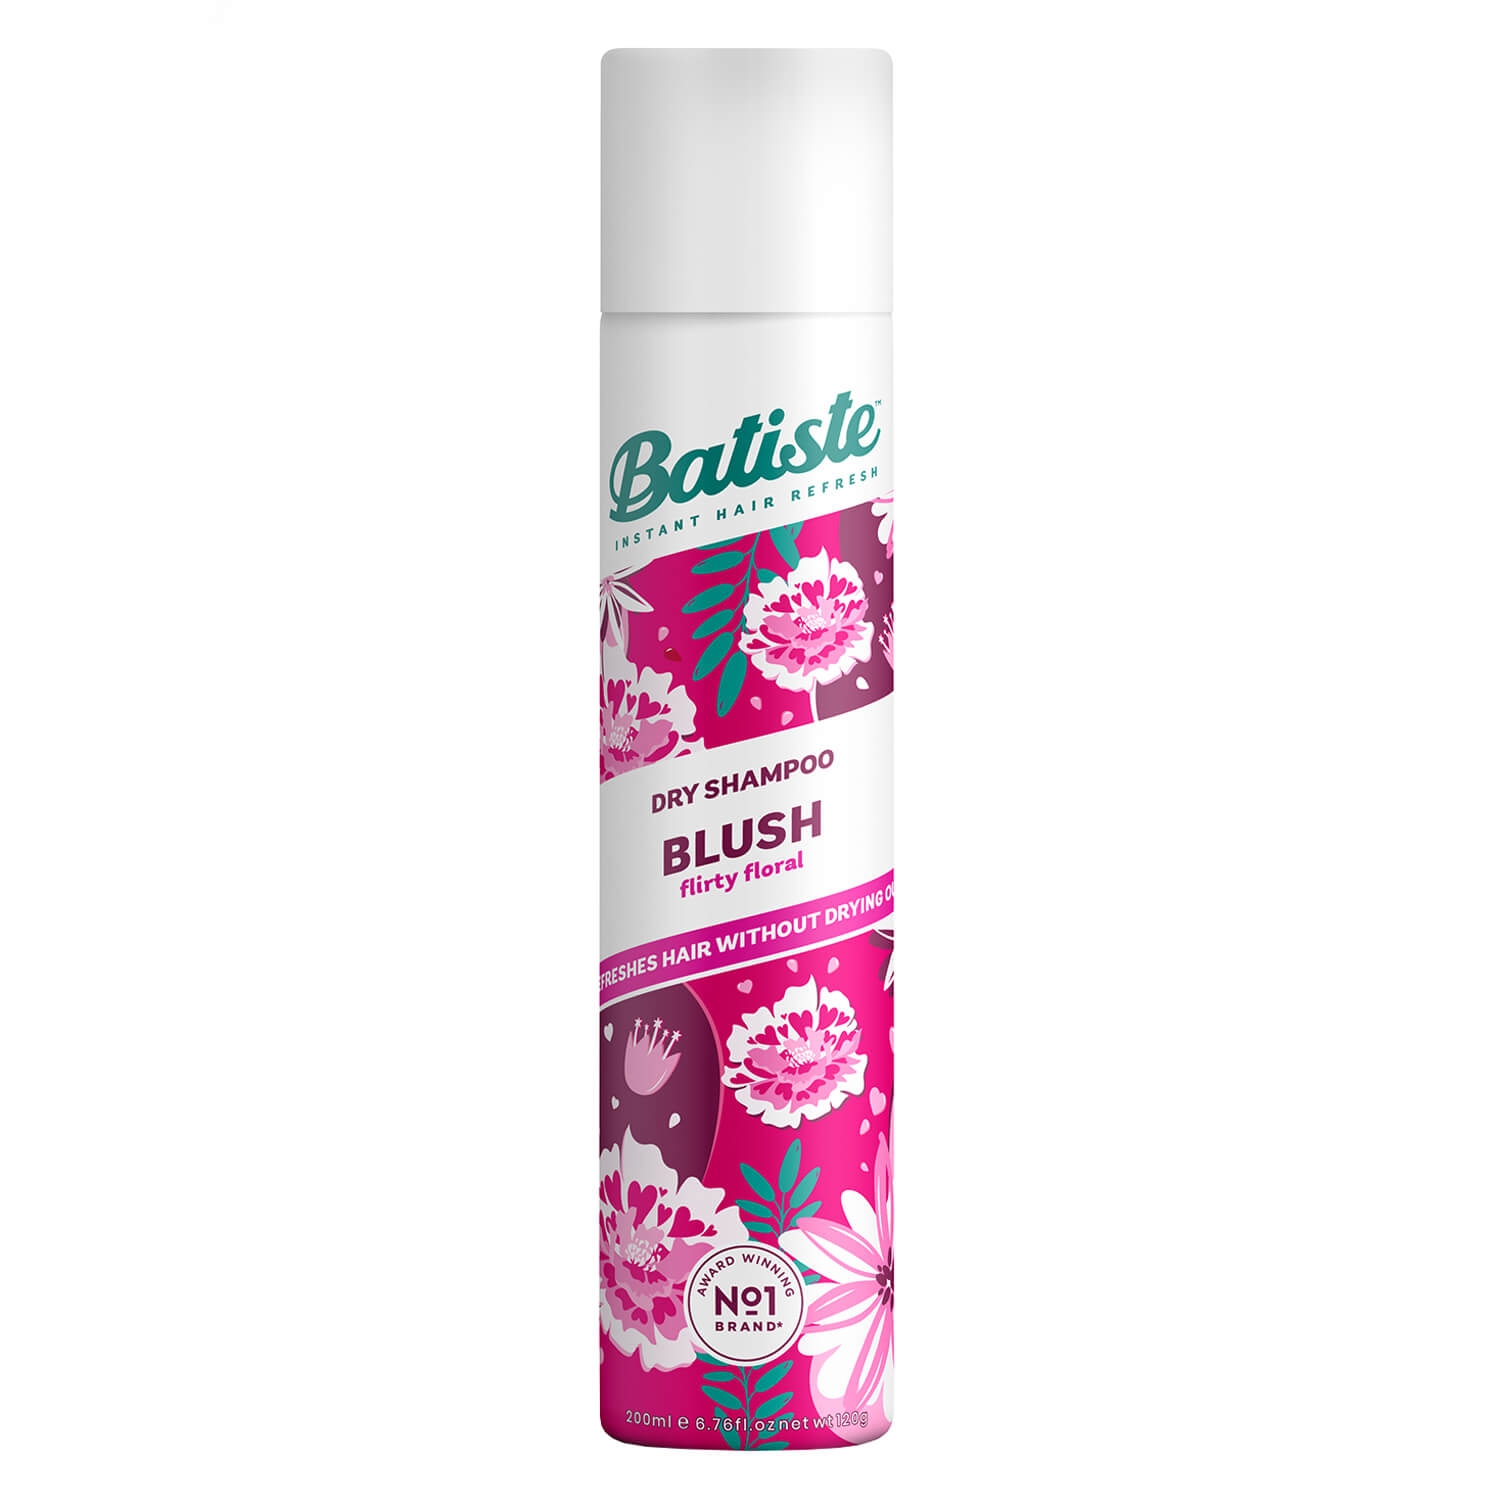 Product image from Batiste - Blush